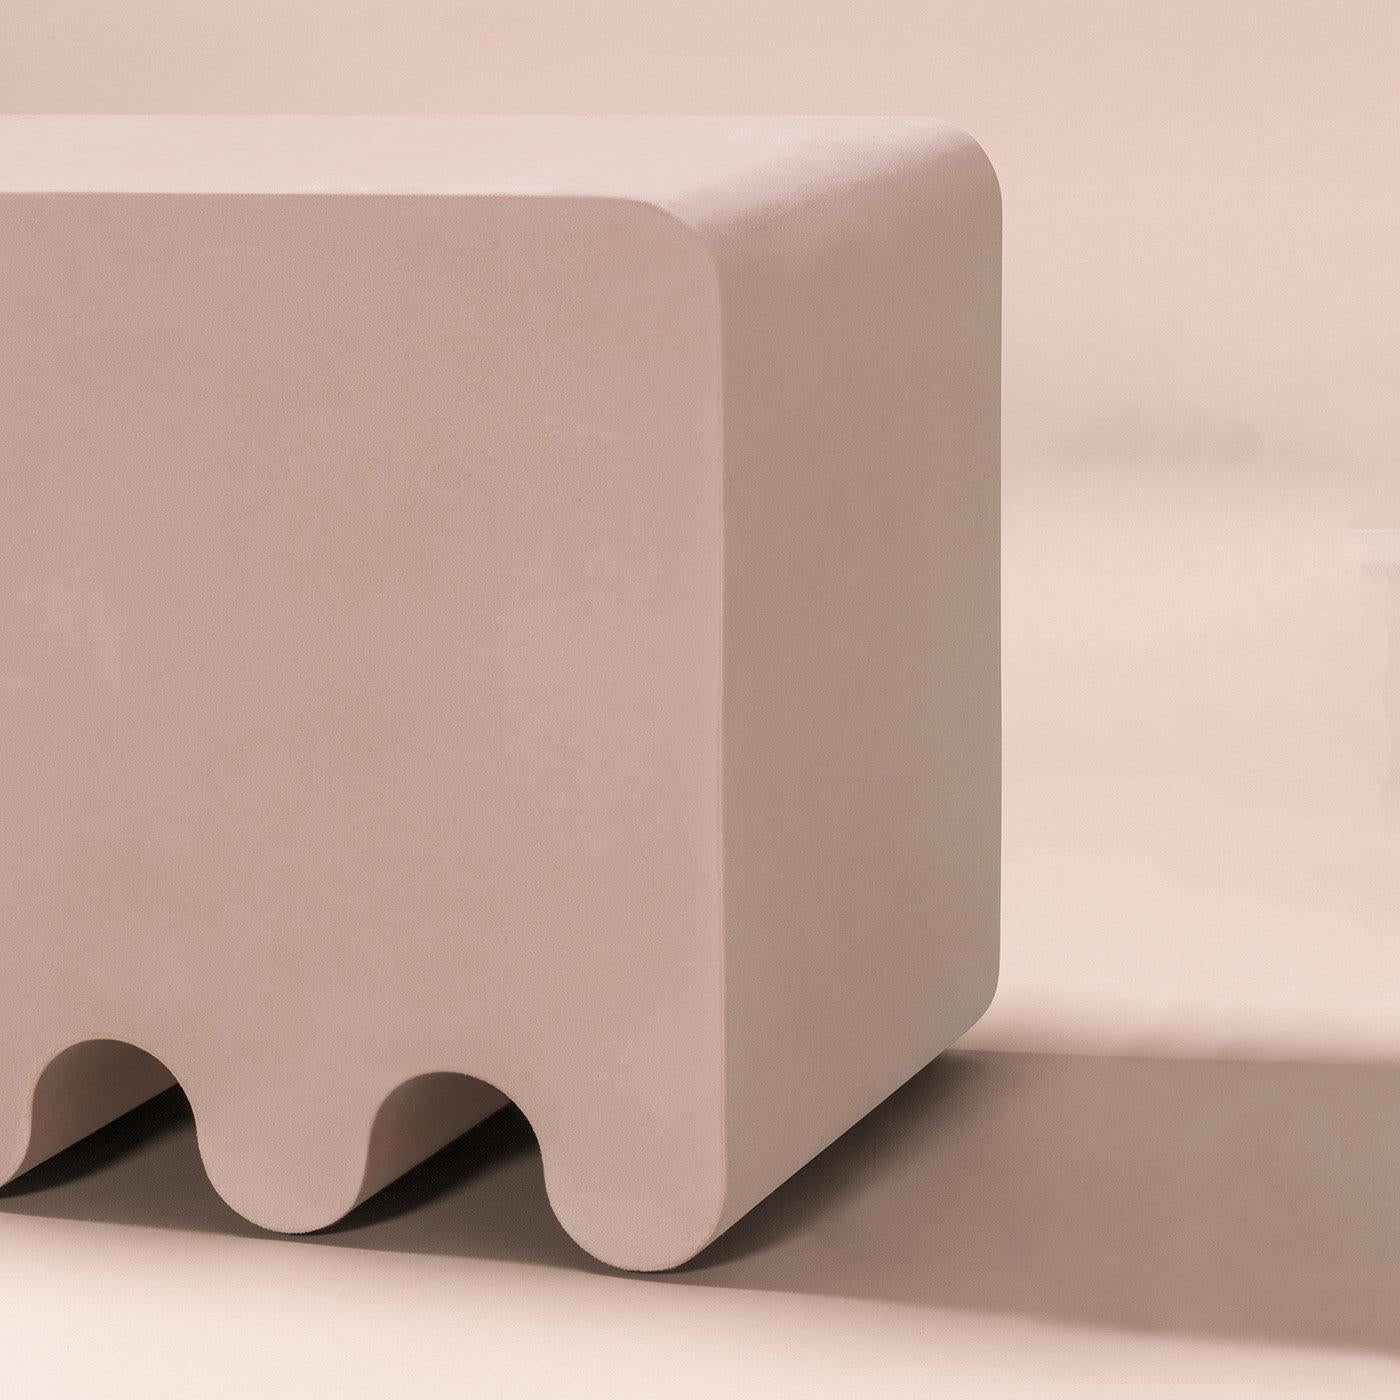 Contemporary suede leather stool - Ossicle by Francesco Balzano for Giobagnara.
The object presented in the image has following finish: A91 Nude Suede Leather.

An iconic piece from the Ossicle Collection of benches, seats, and tables, this pink